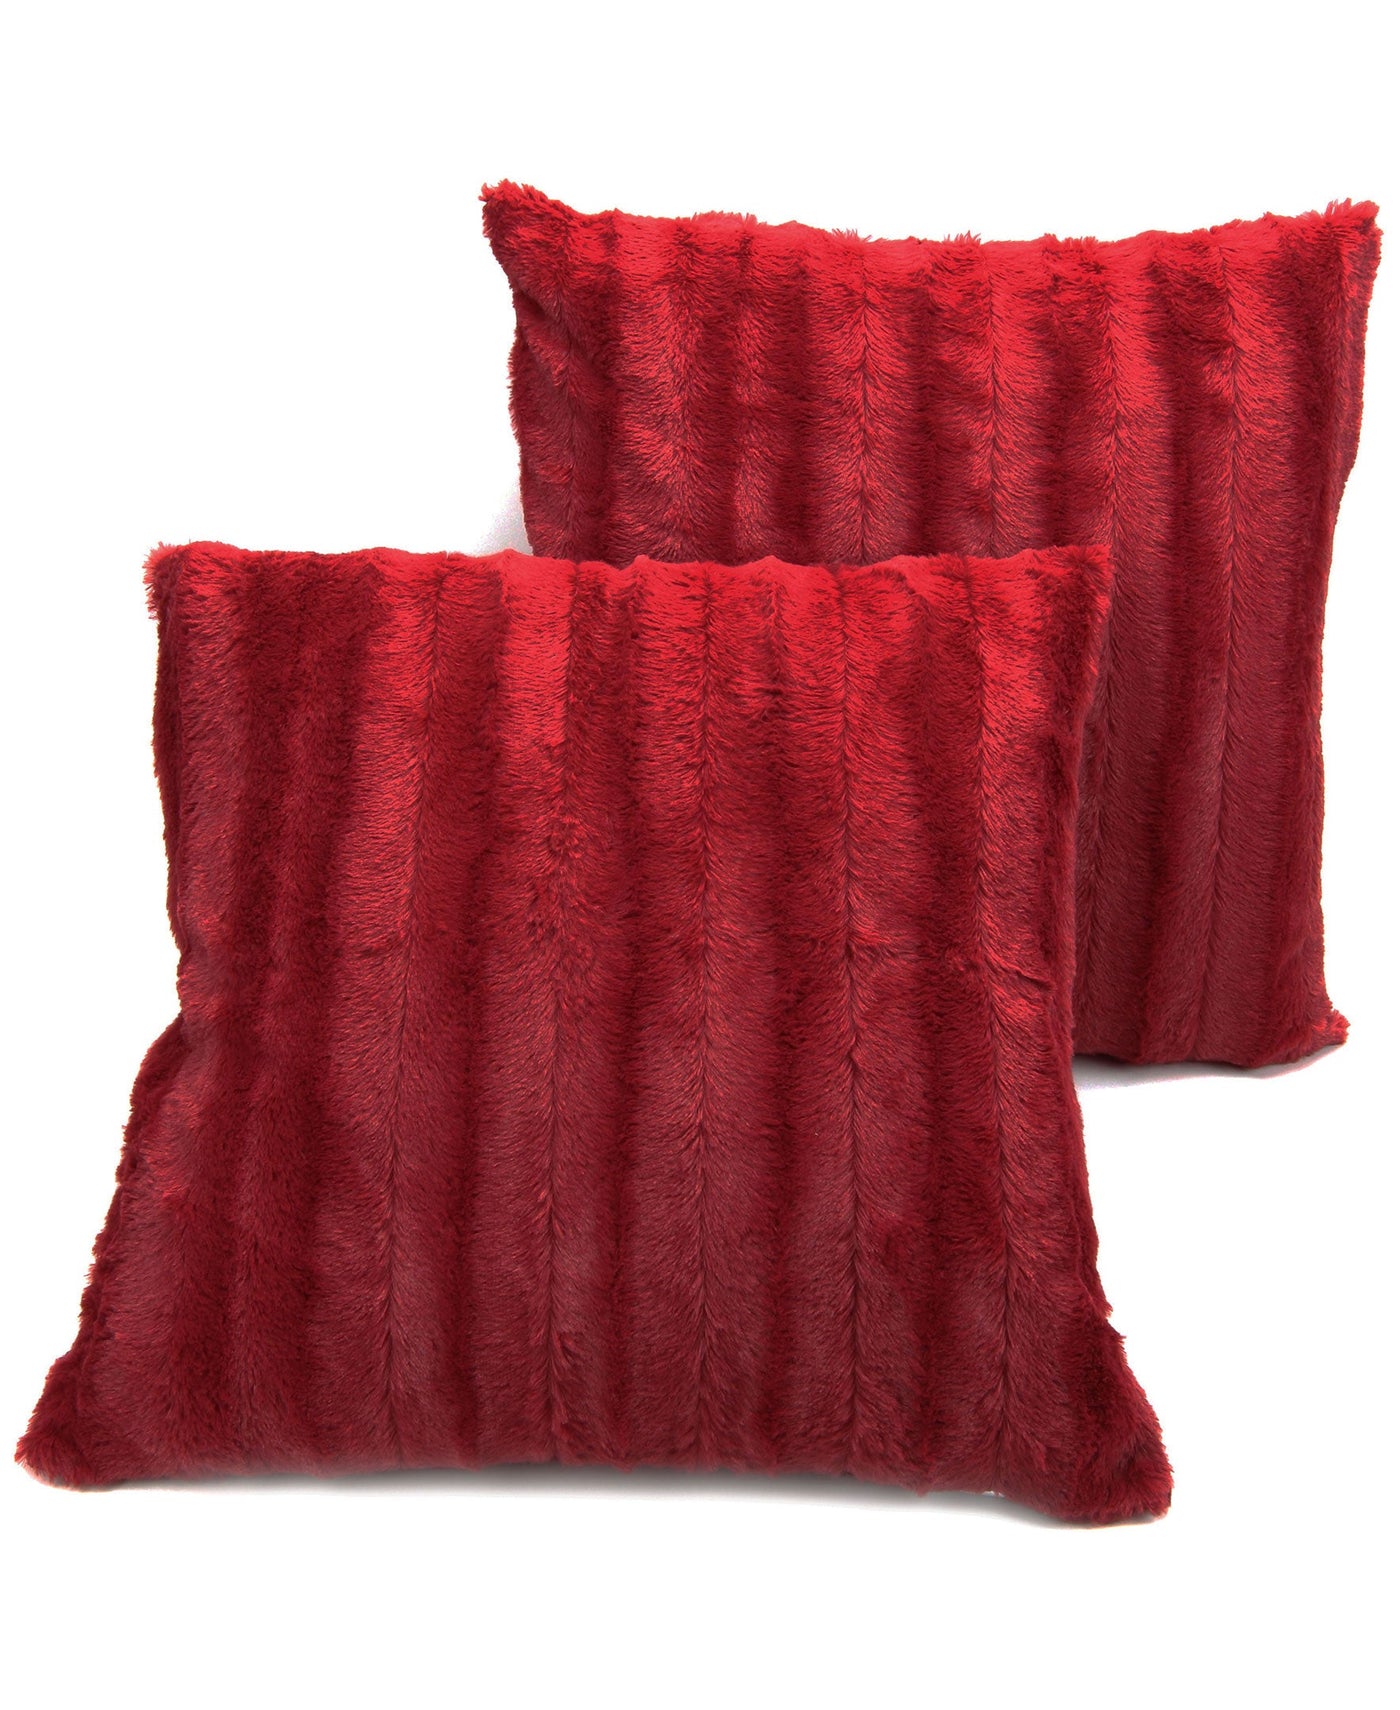 Cheer Collection Velour Throw Pillows - Set of 2 Decorative Couch Pillows -  26 x 26